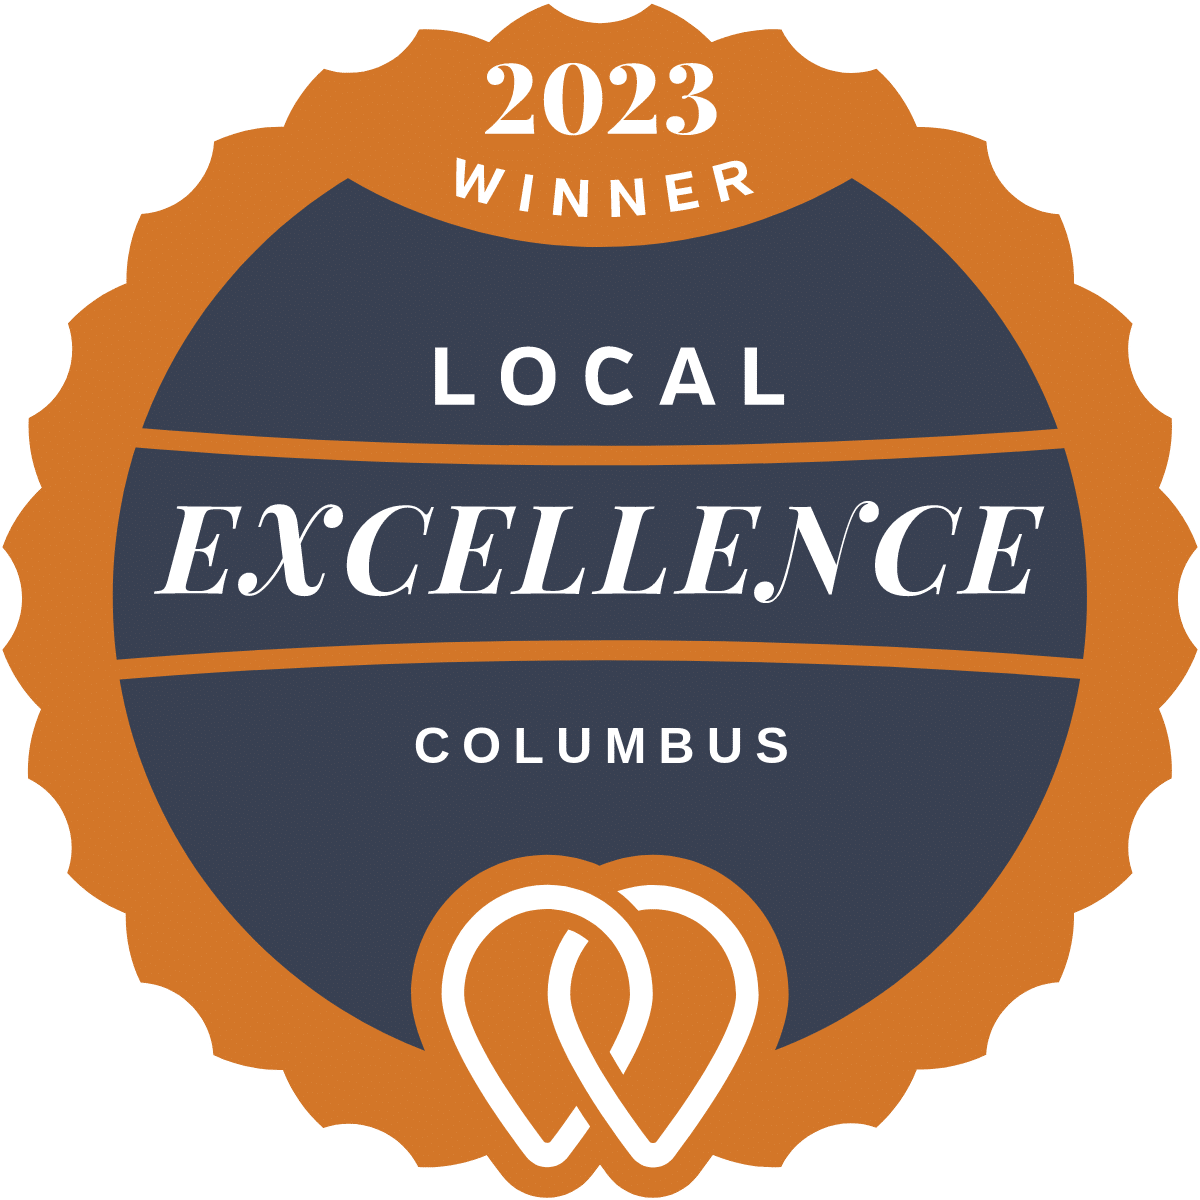 Kow Abundant wins 2023 Local Excellent Award from UpCity